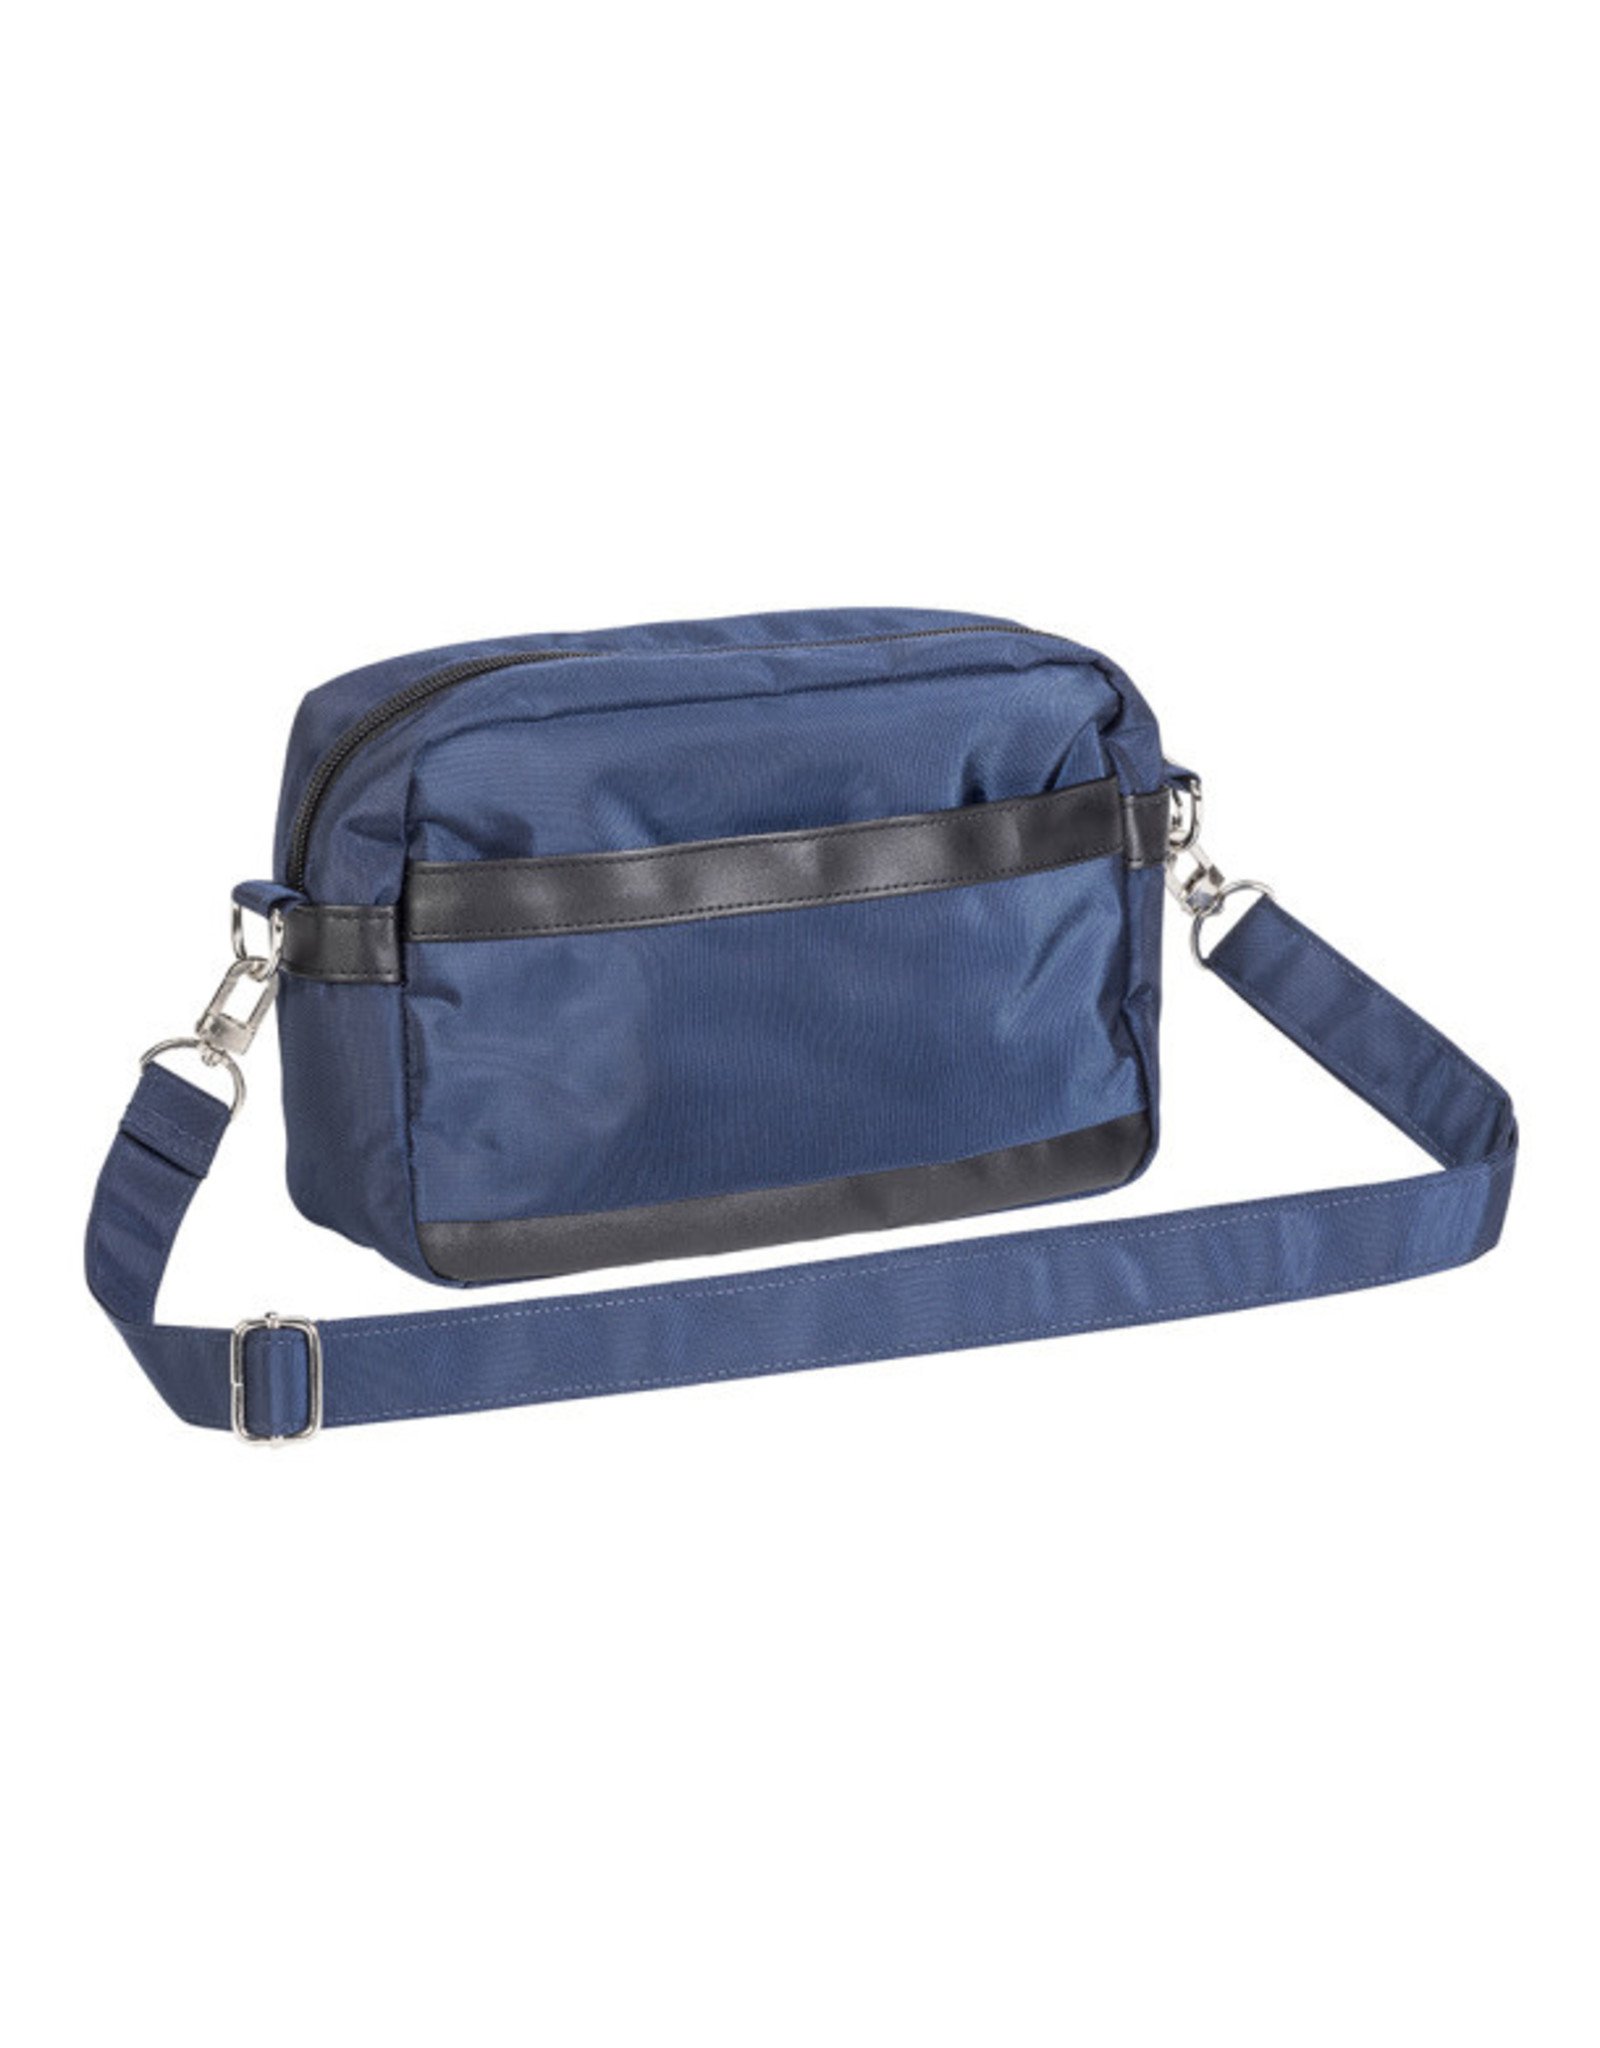 Drive Multi-Use Accessory Bag - Navy